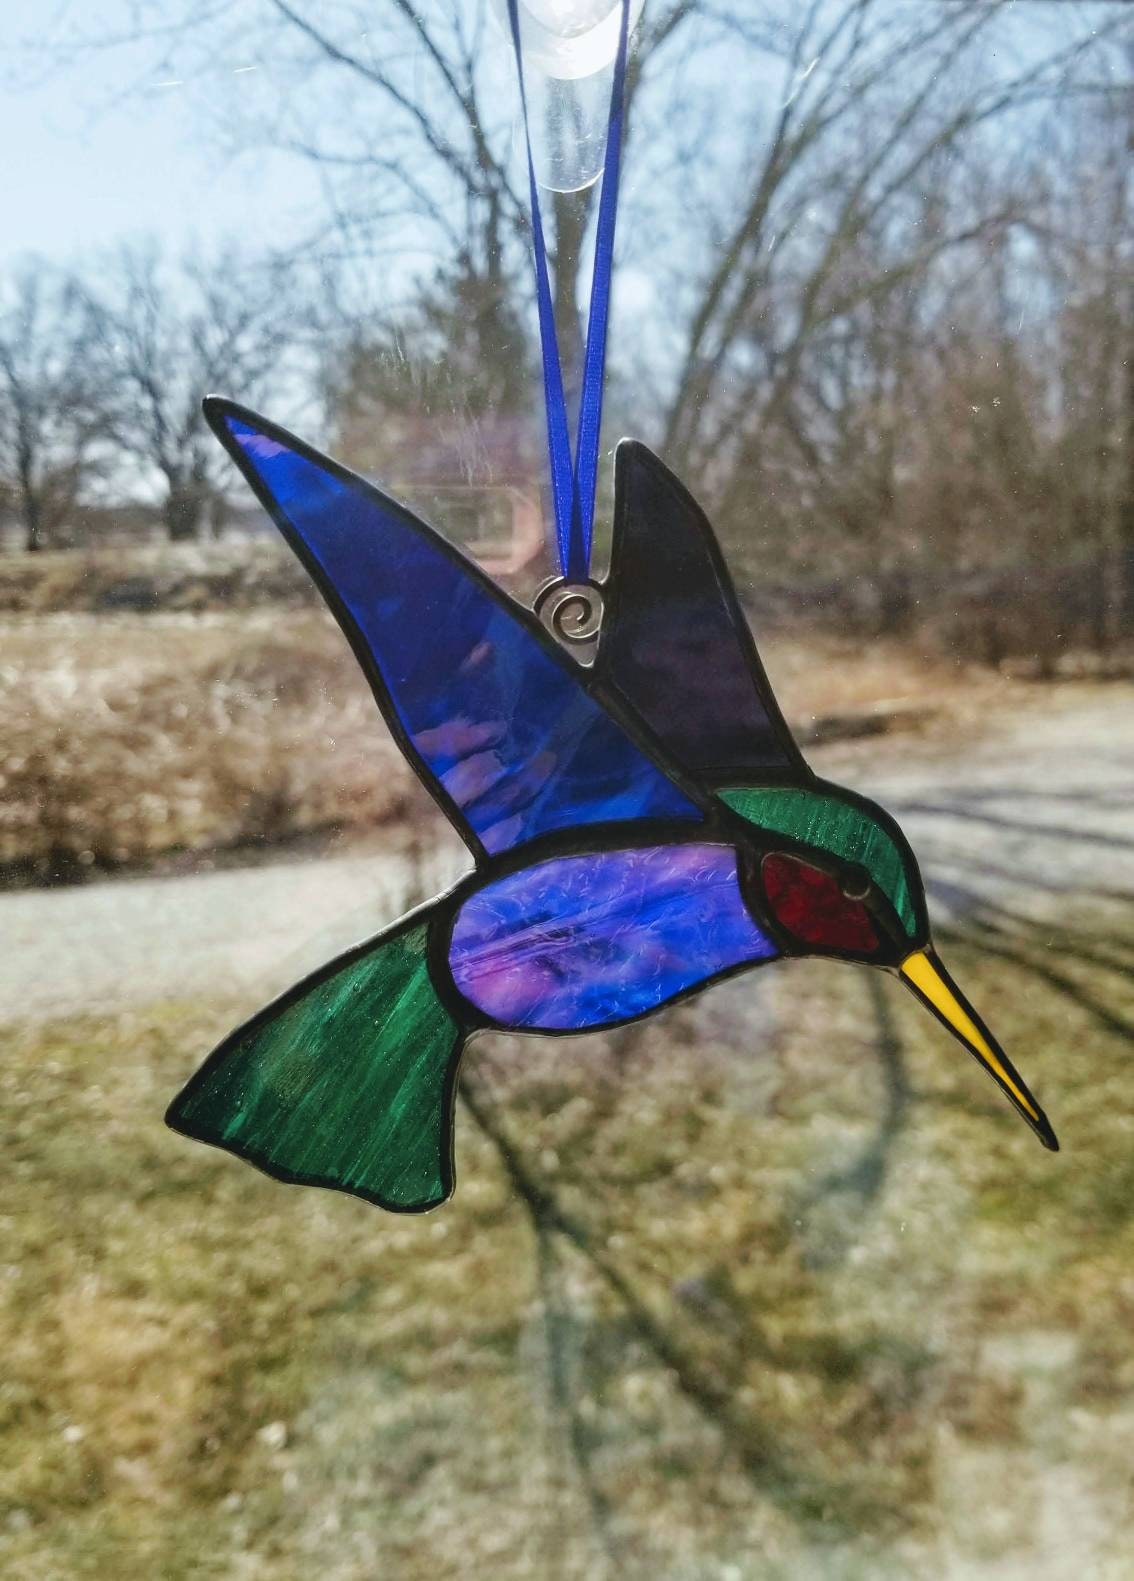 Glass Hummingbird Suncatcher. Stained Glass Window Hanging. Elegant and Handmade using vintage & newer sheets of glass. Pink, Purple, Blue.